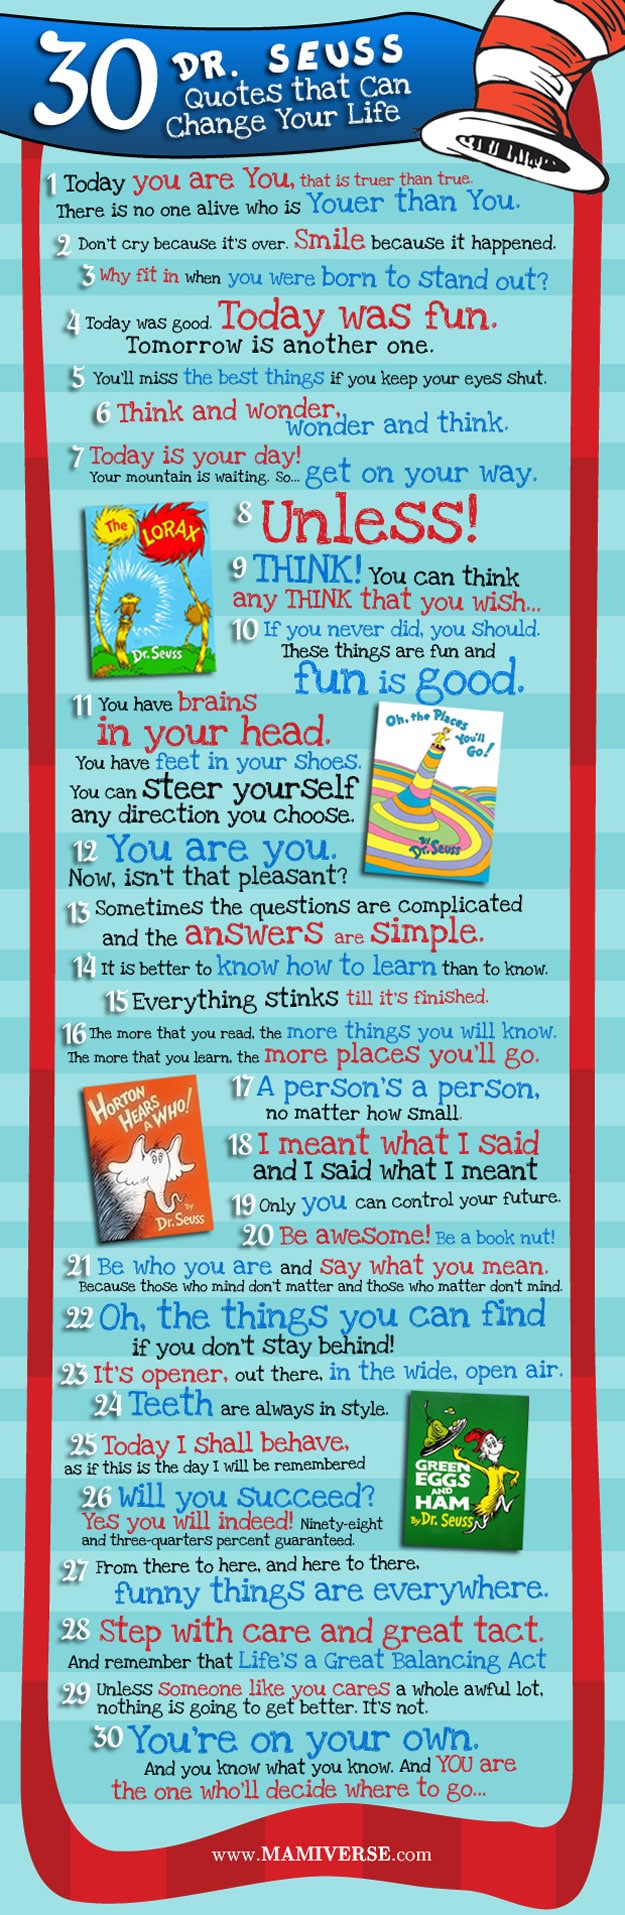 30 Dr. Seuss Quotes That Could Change Your Life Today [Chart]